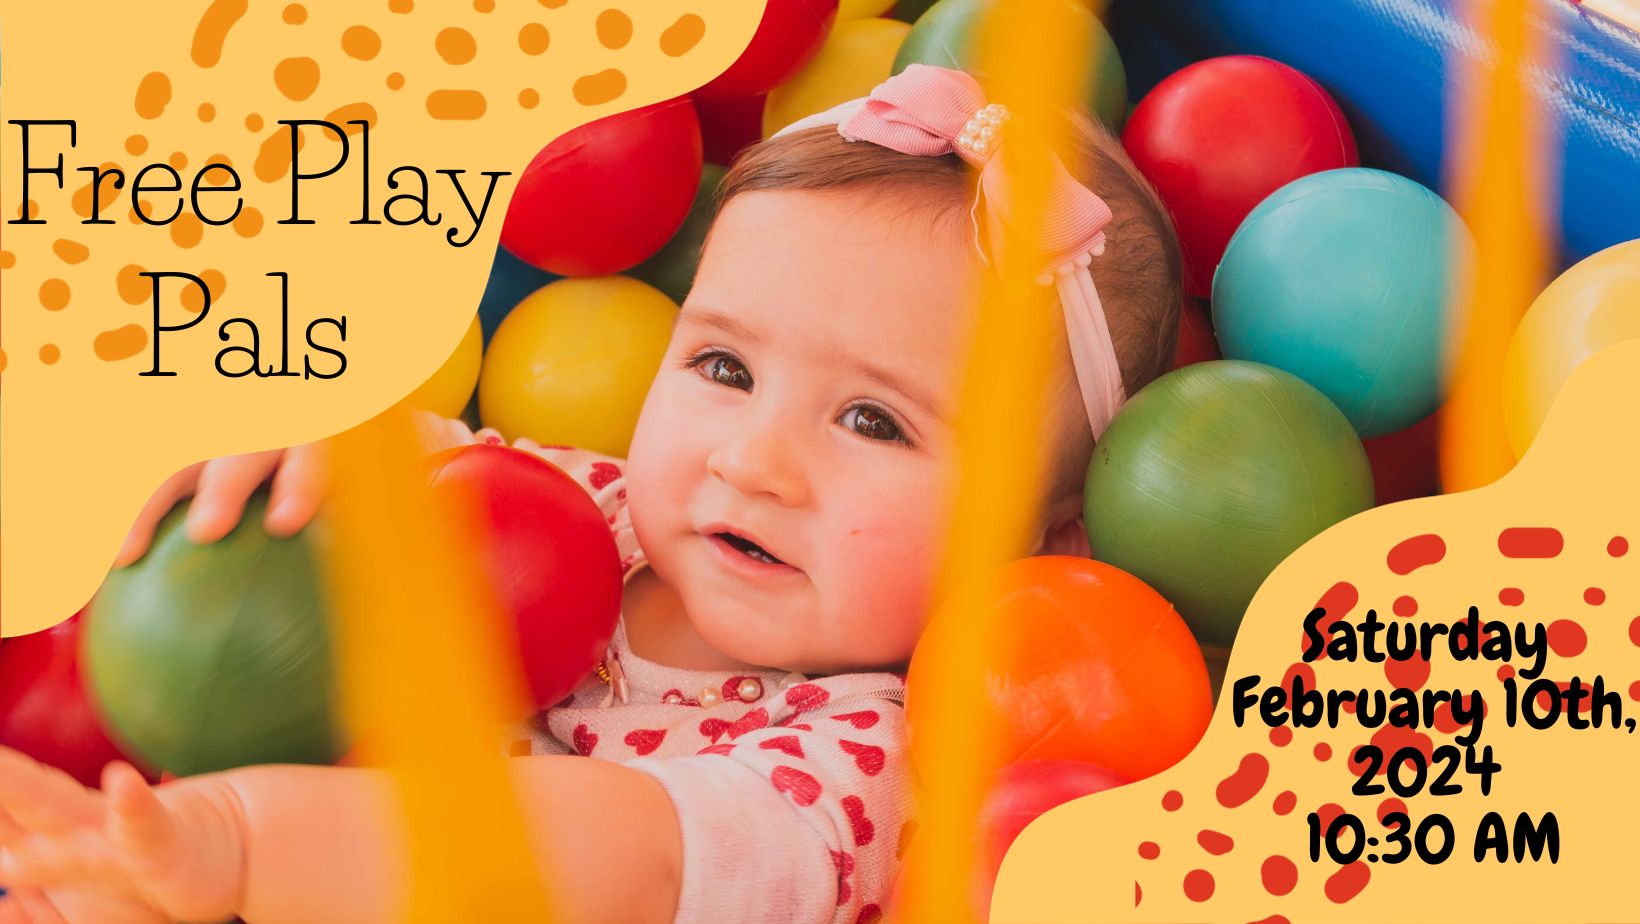 Free Play Pals Title; Baby In Ball Pit, Saturday February 10th, 2024 10:30 AM